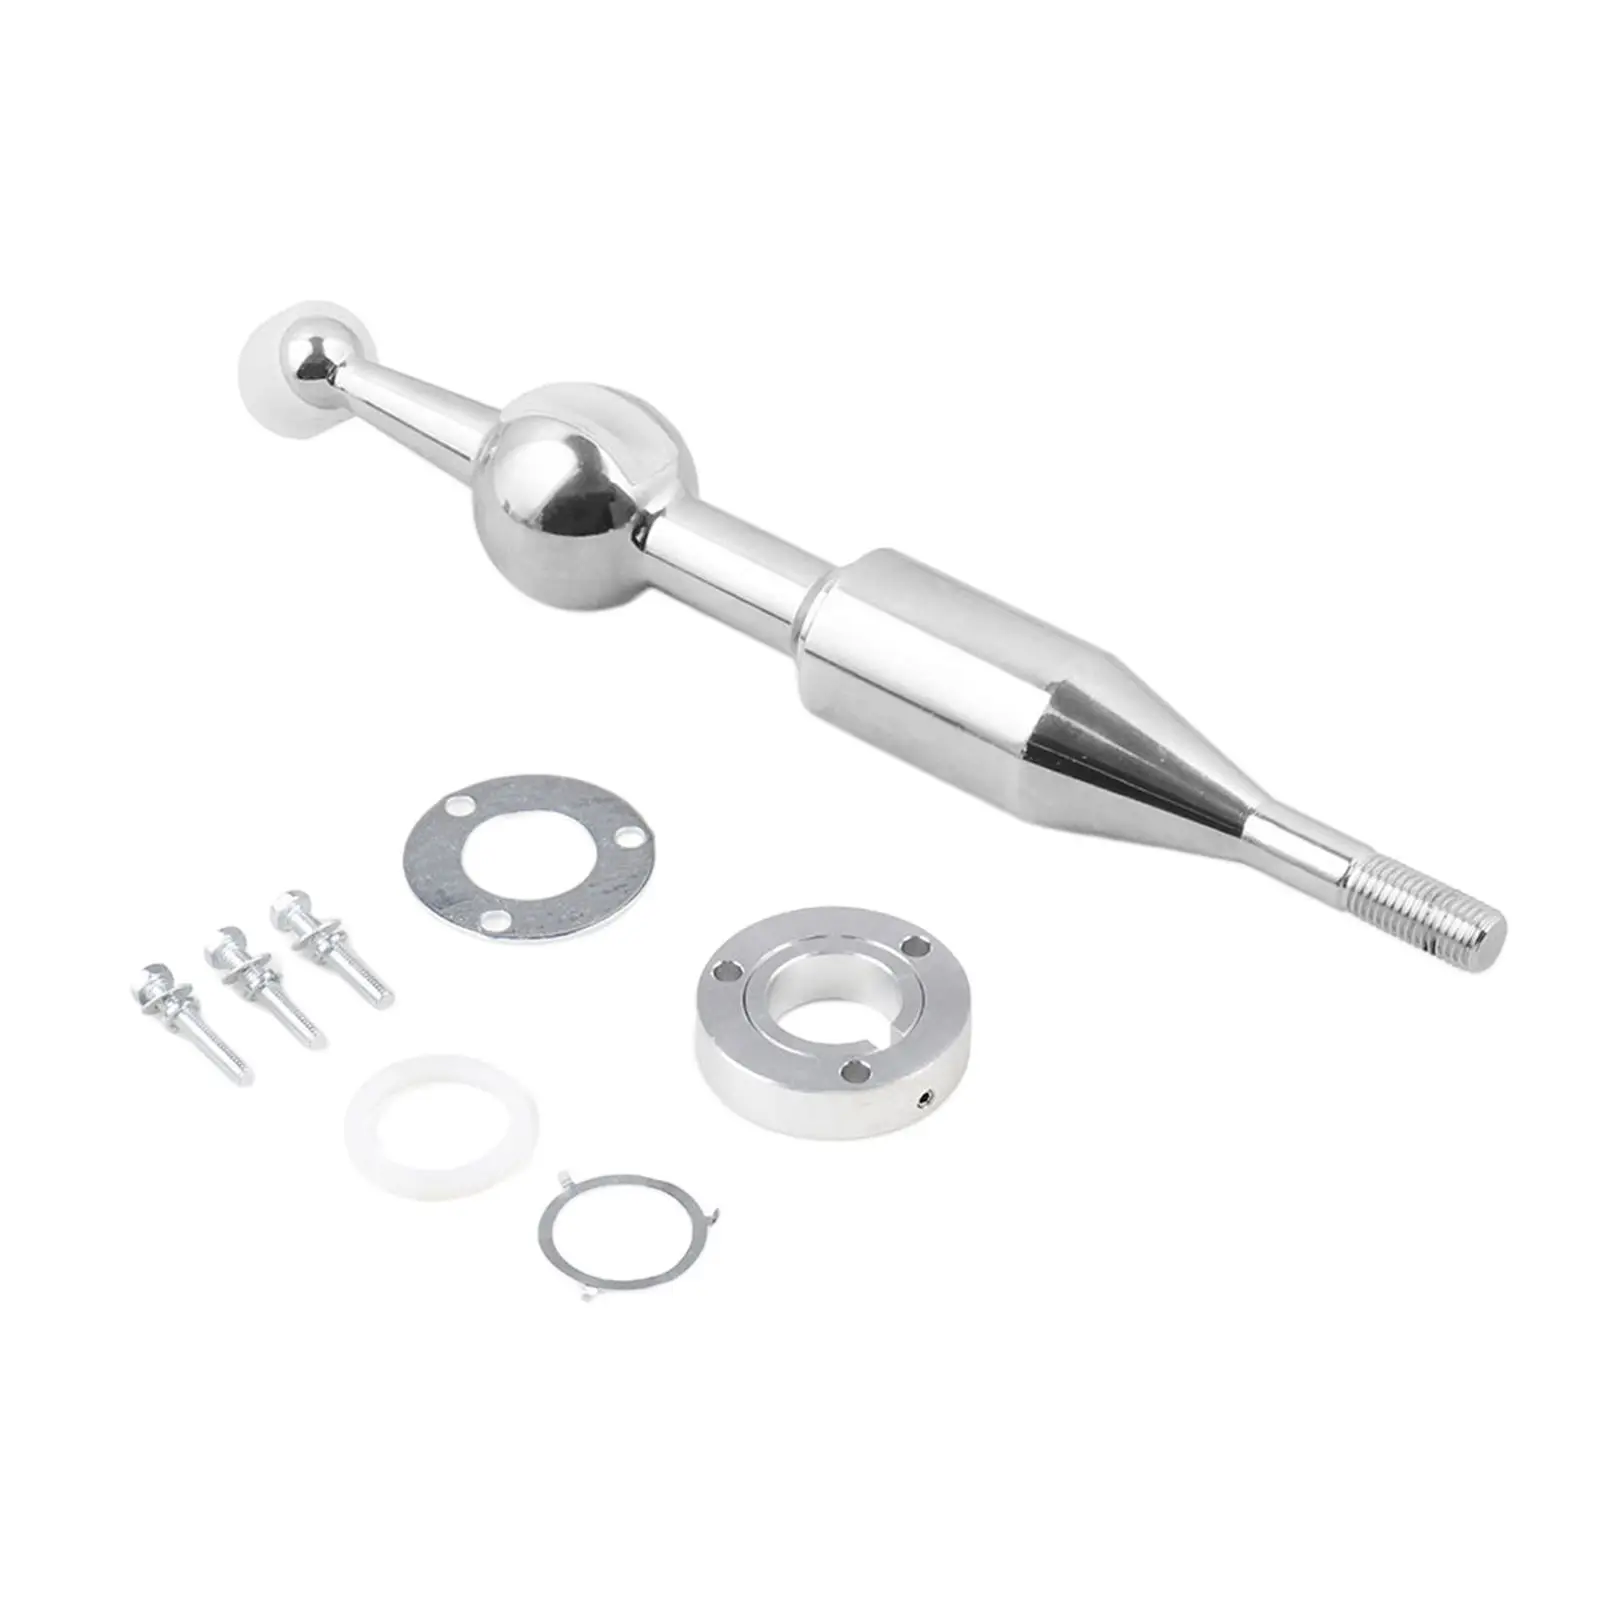 Gear Lever Modified Silver Manual Transmission Throw Short Shifter Lever Aluminum Alloy Kit for Mazda RX-7 1986-1991